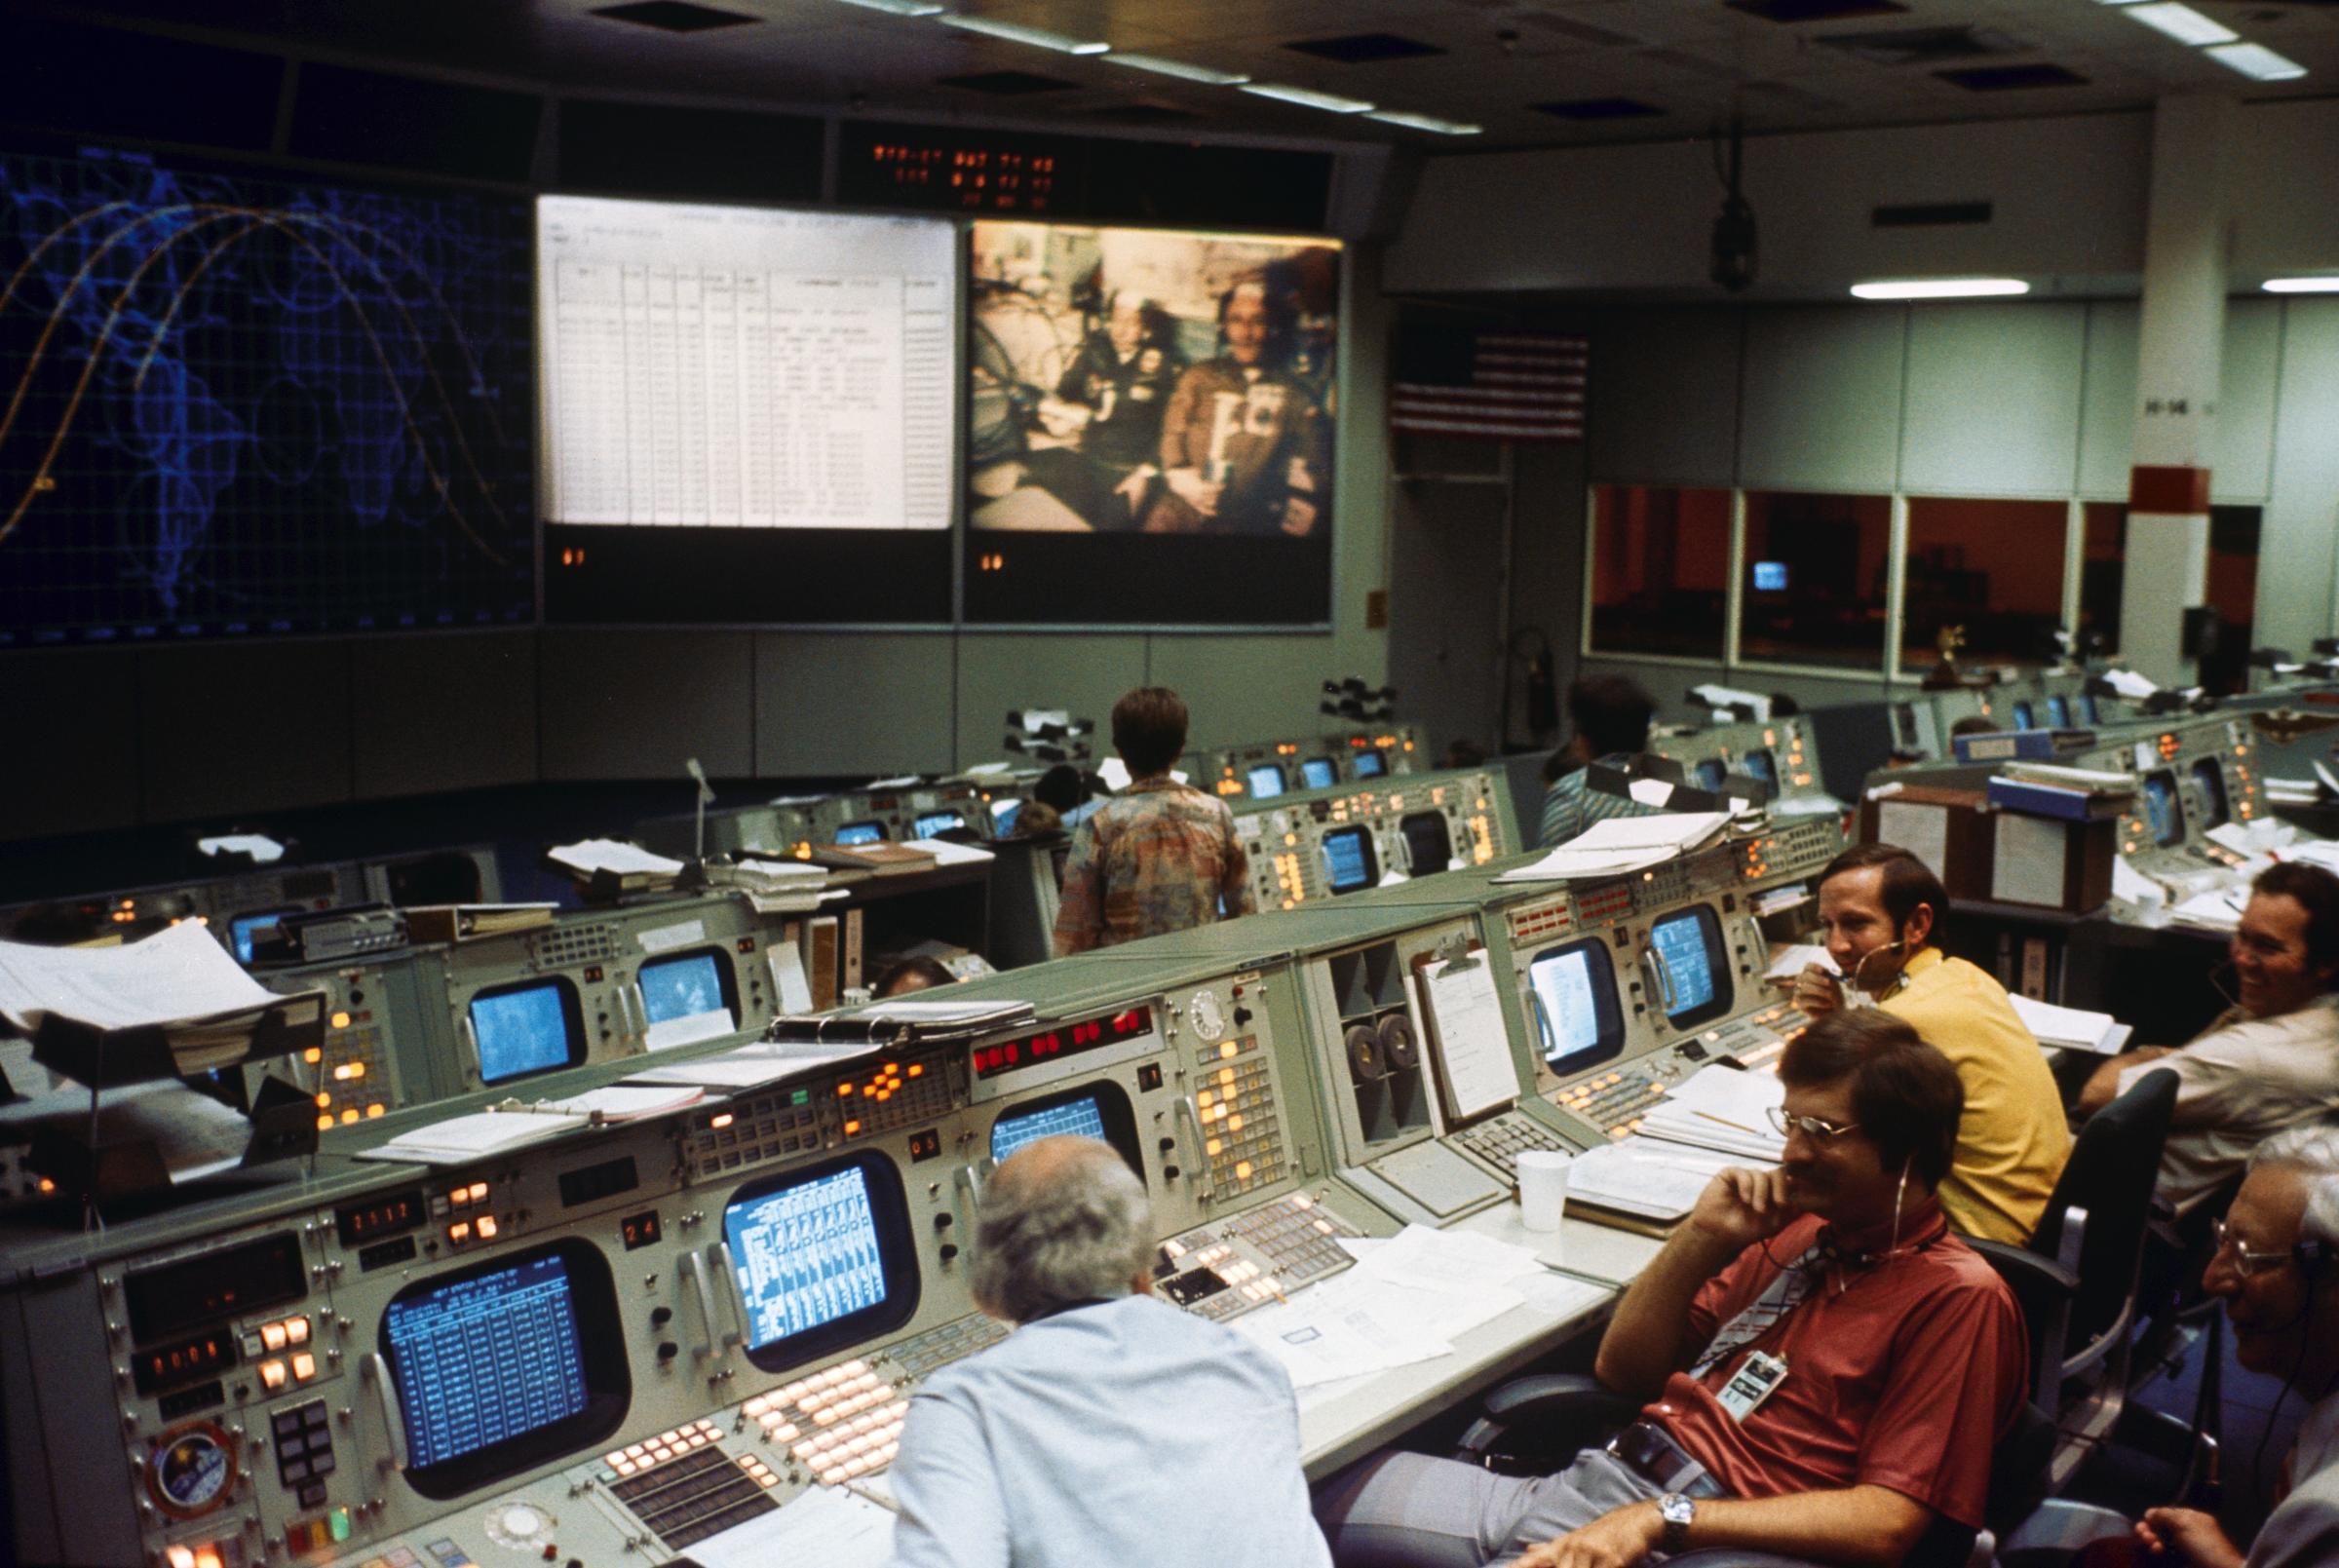 Activity inside Mission Control in Houston during the Apollo Soyuz Test Project docking mission.